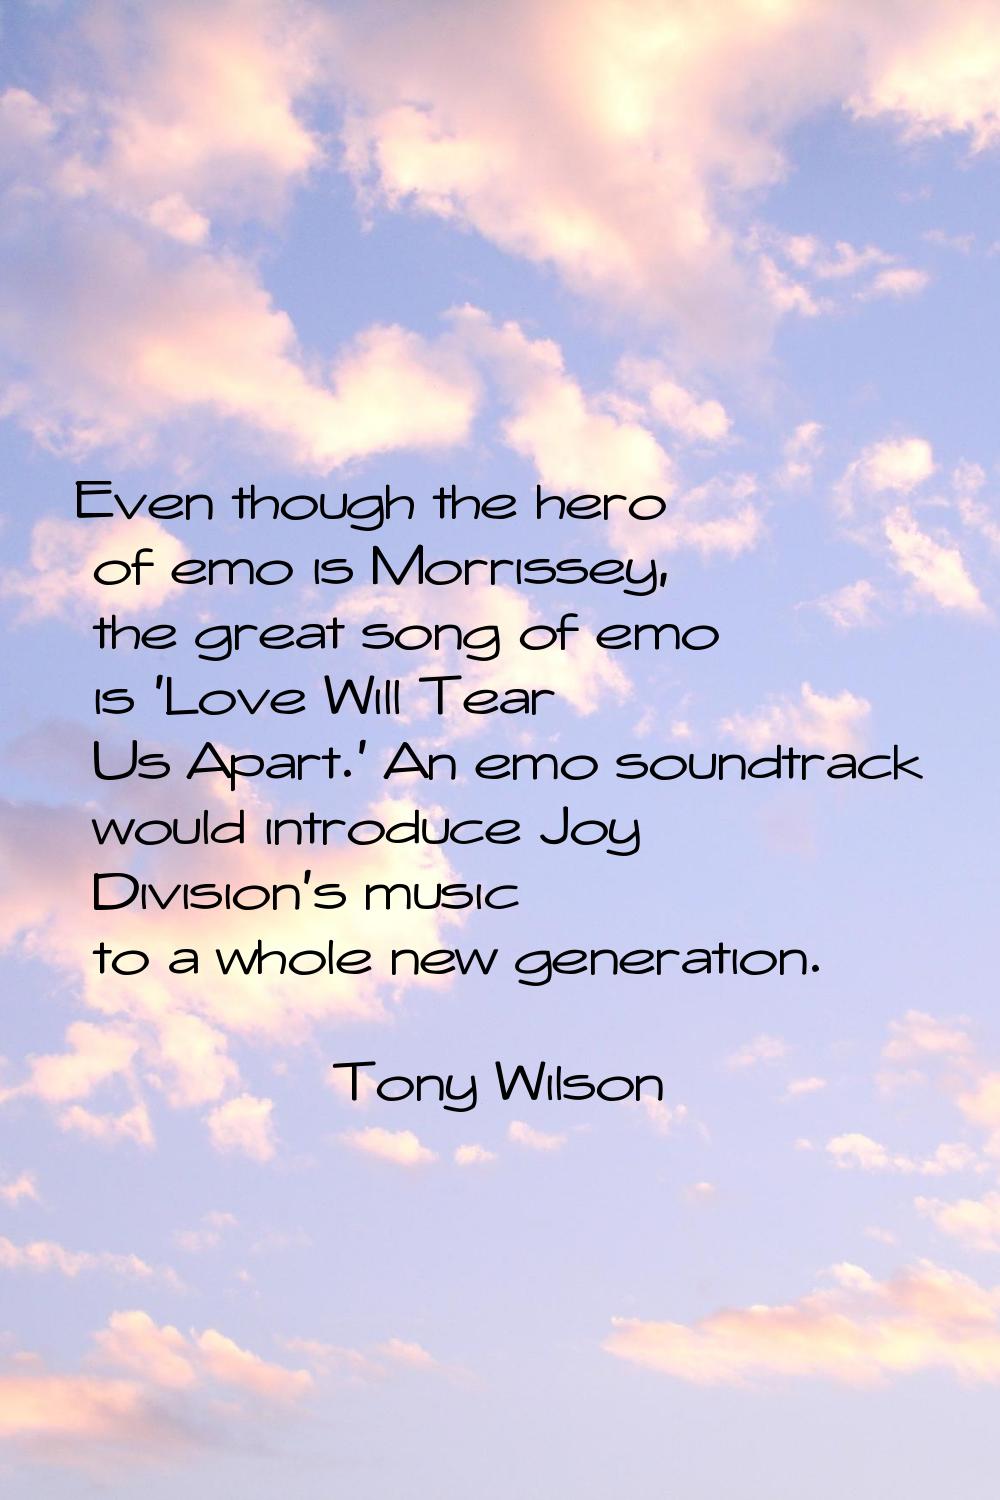 Even though the hero of emo is Morrissey, the great song of emo is 'Love Will Tear Us Apart.' An em